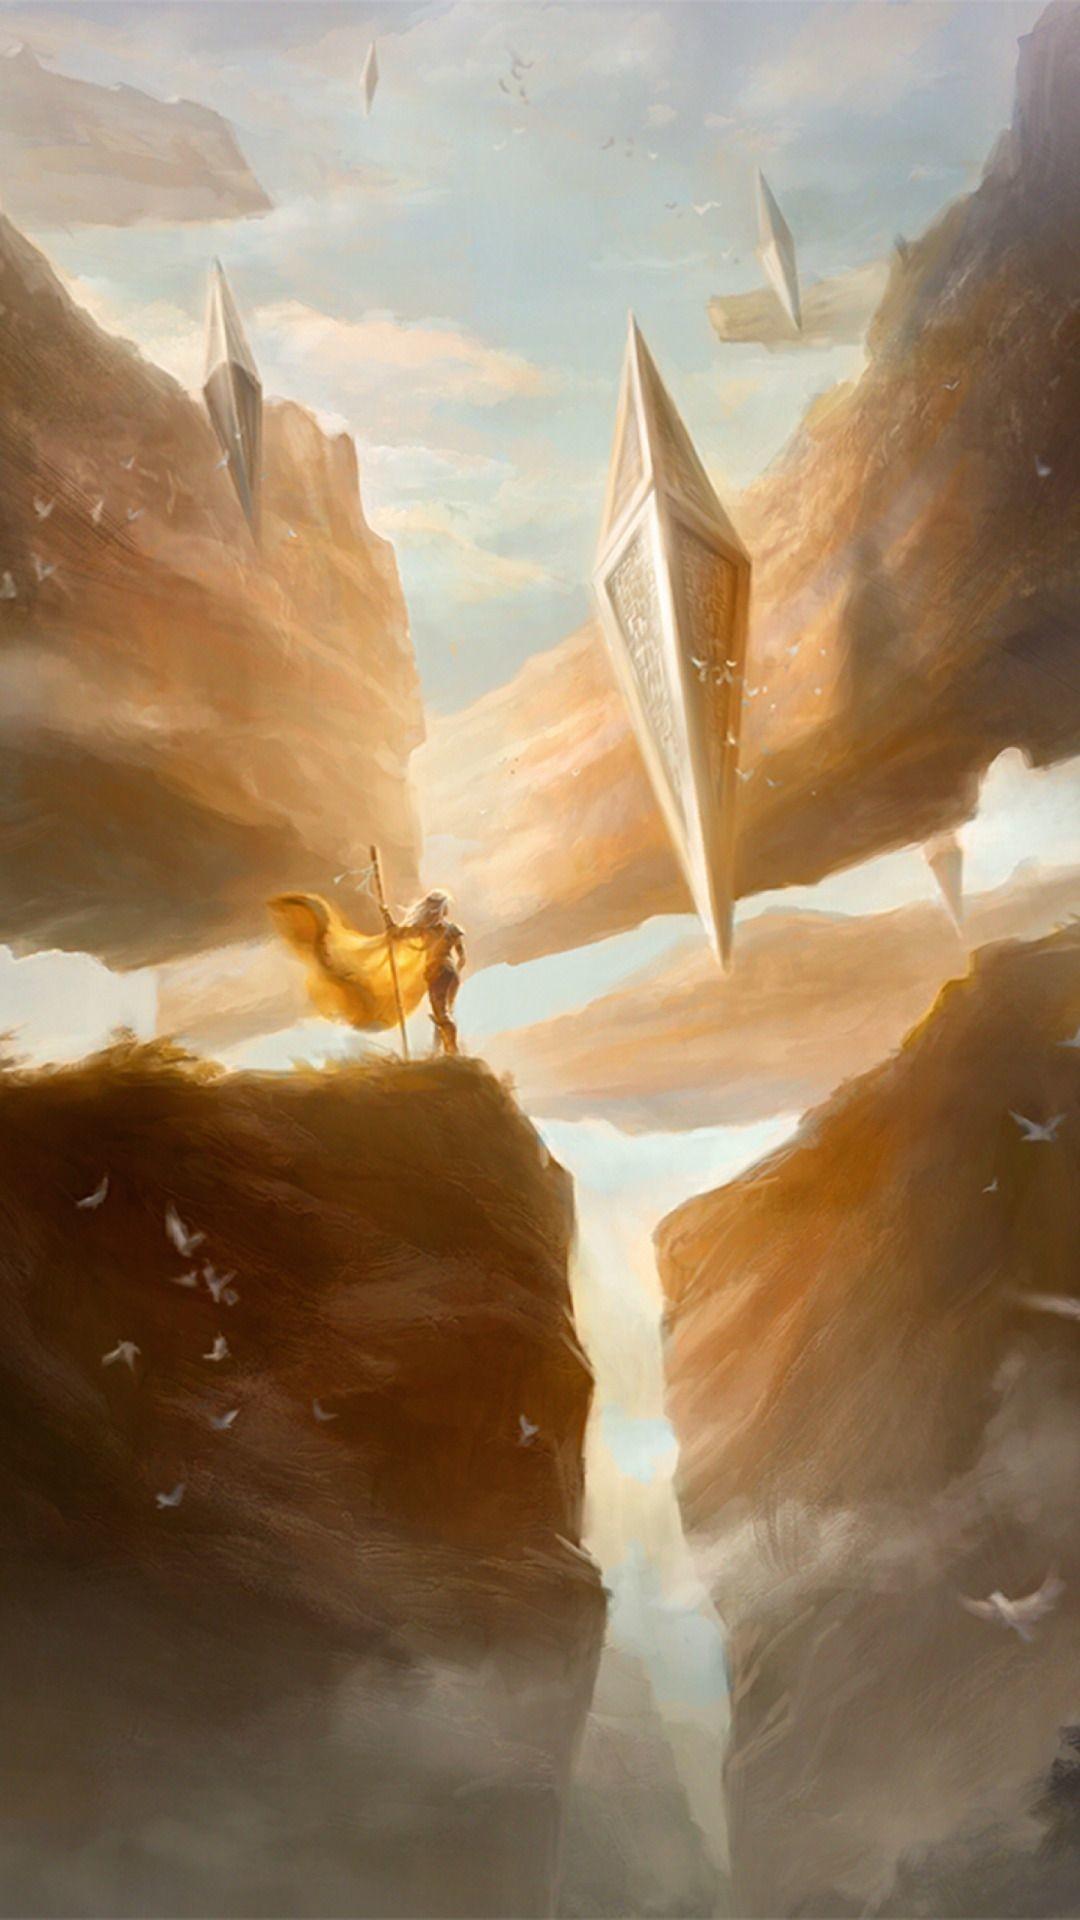 Magic The Gathering Smartphone Wallpapers Wallpaper Cave